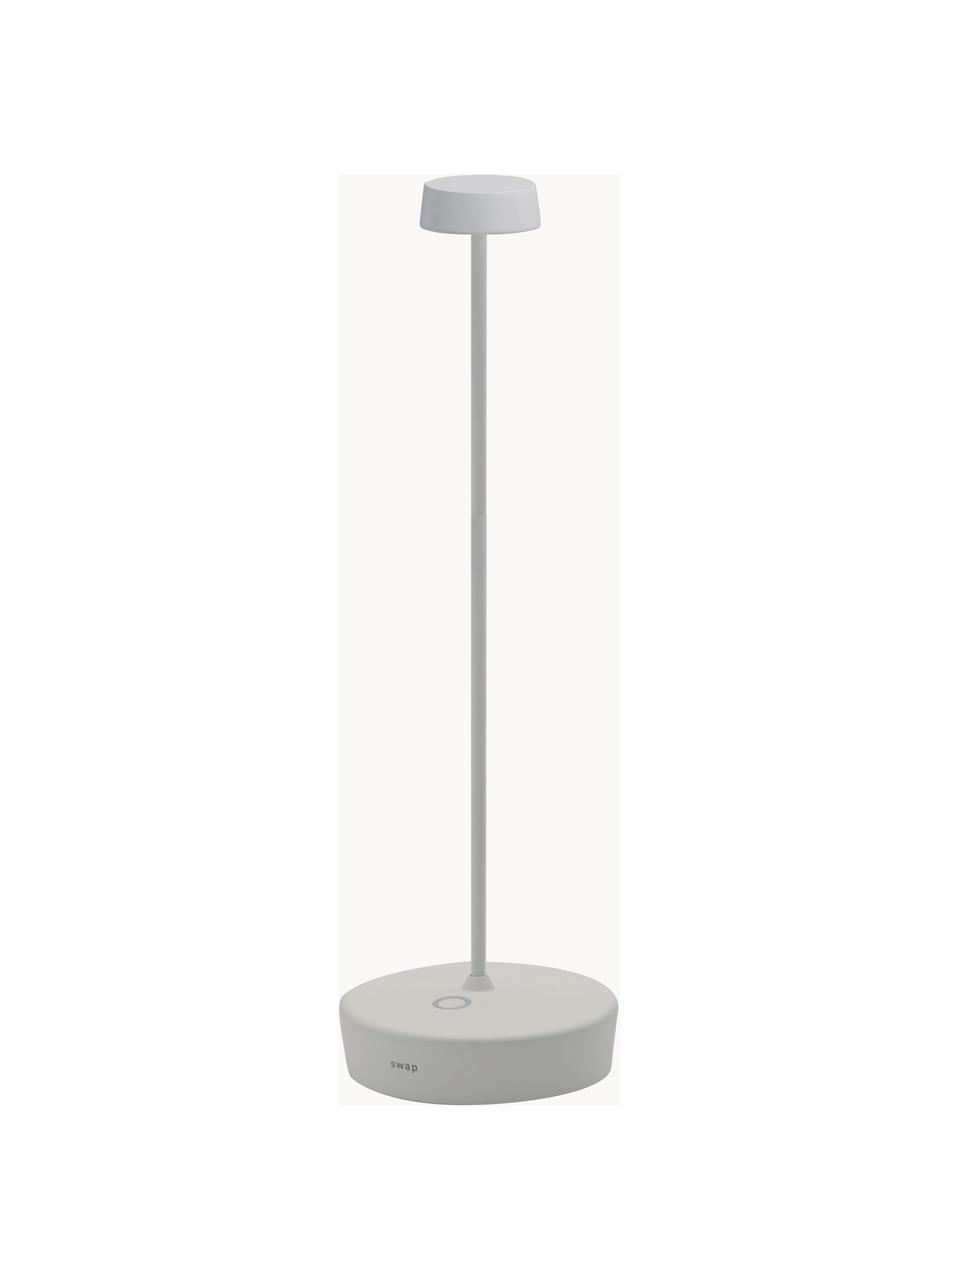 Mobile dimmbare LED-Tischlampe Swap, Weiß, Ø 10 x H 29 cm